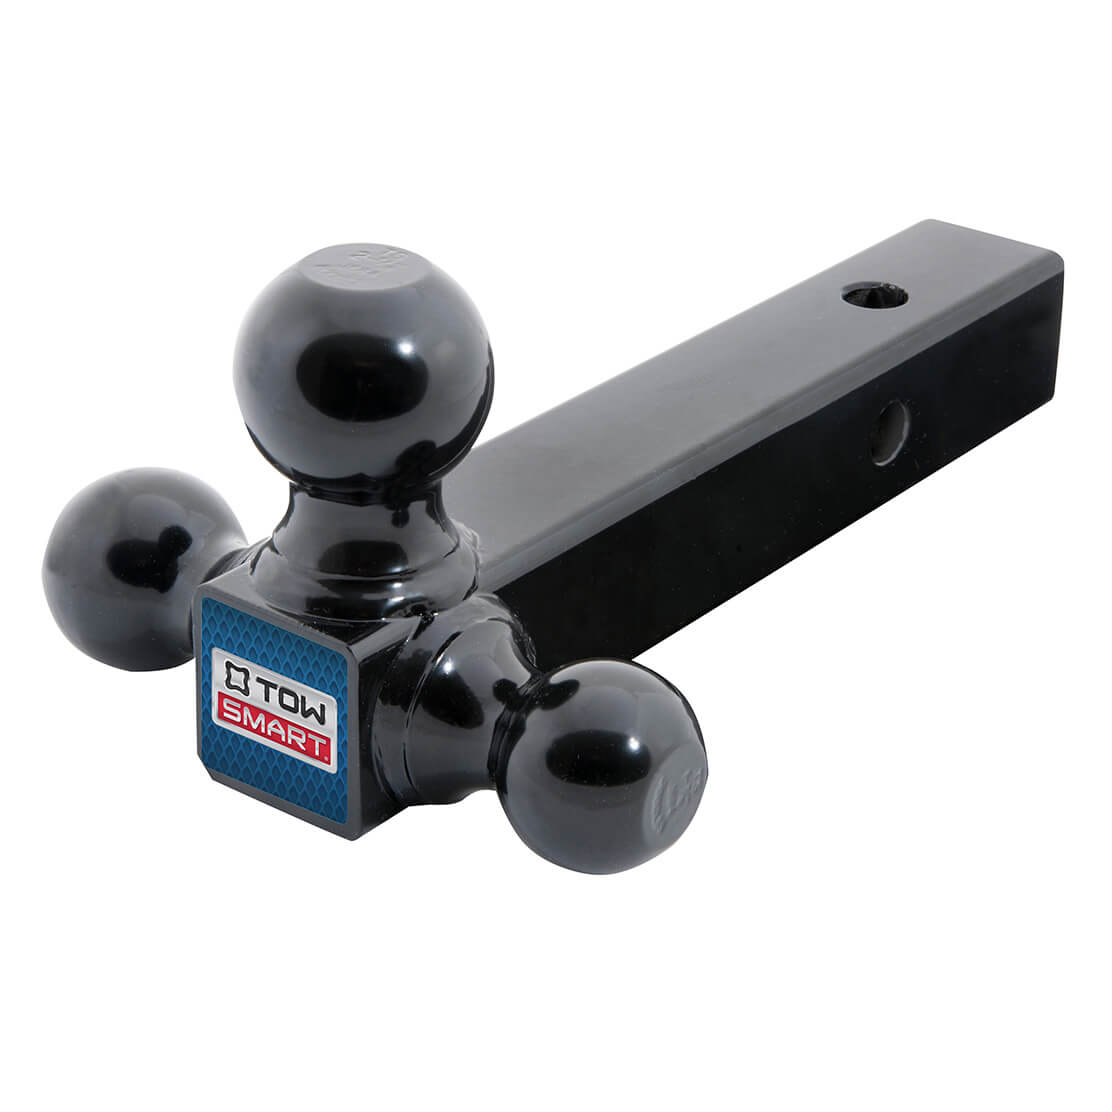 Class 3 Up to 10,000 lb. 1-7/8 in., 2 in, and 2-5/16 in. Ball Diameters  TriBall Adjustable Trailer Hitch Ball Mount - TowSmart